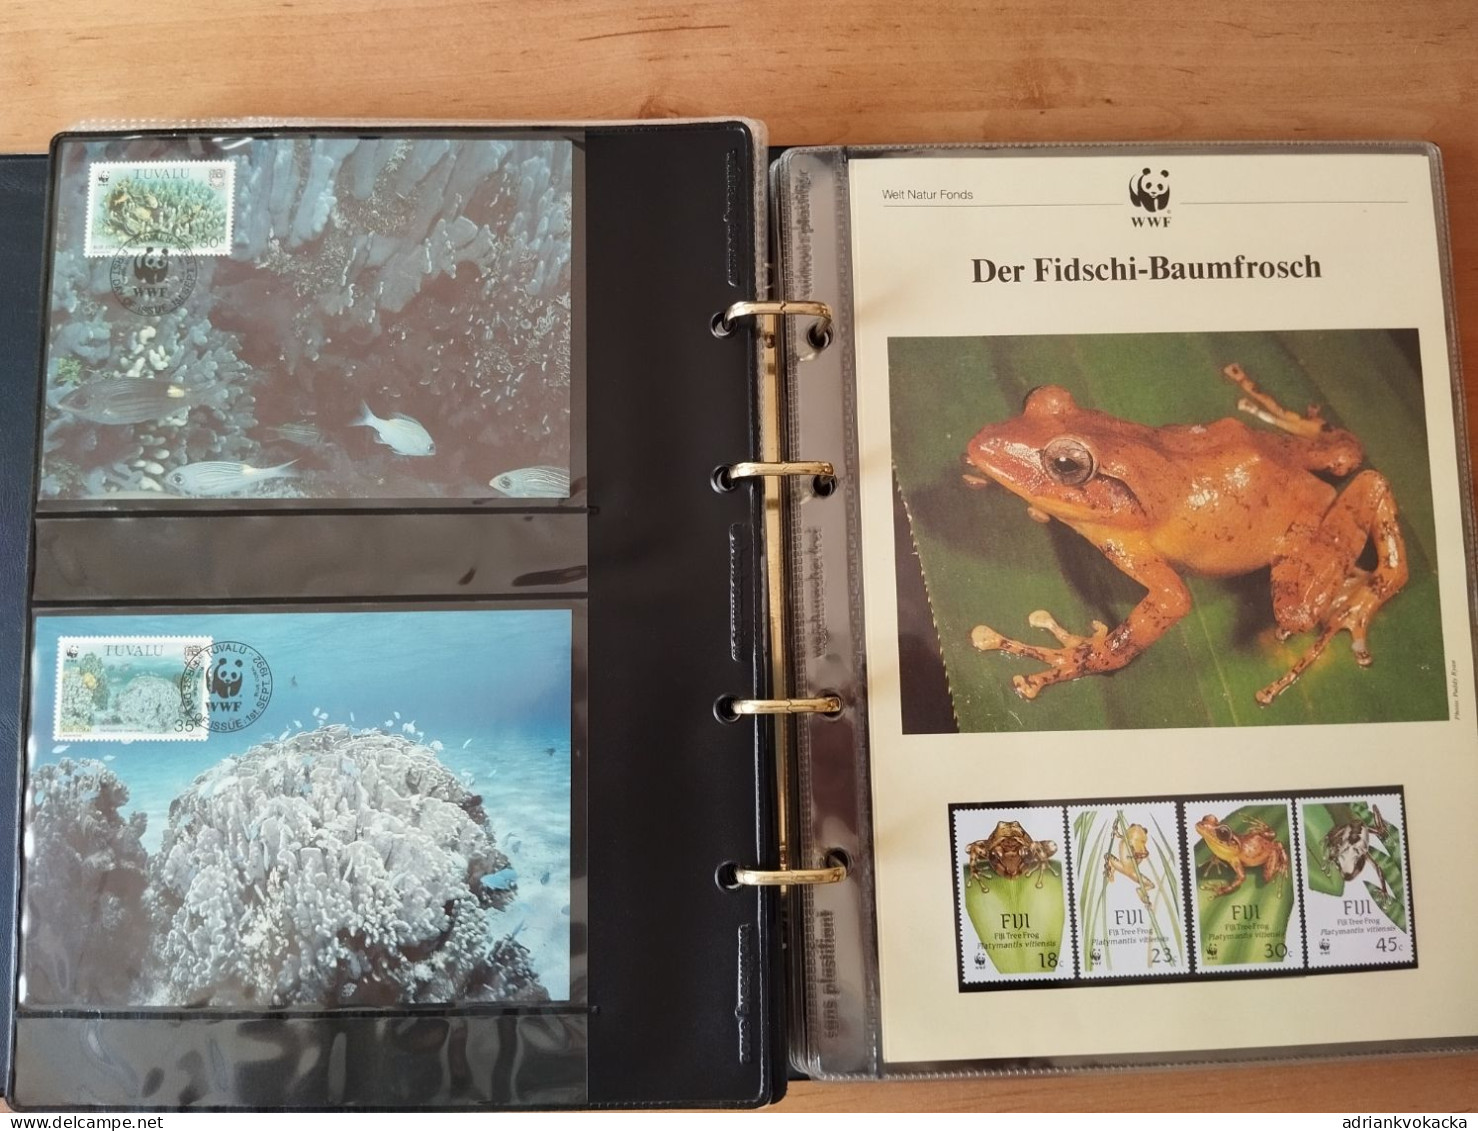 WWF - Two albums with various fauna